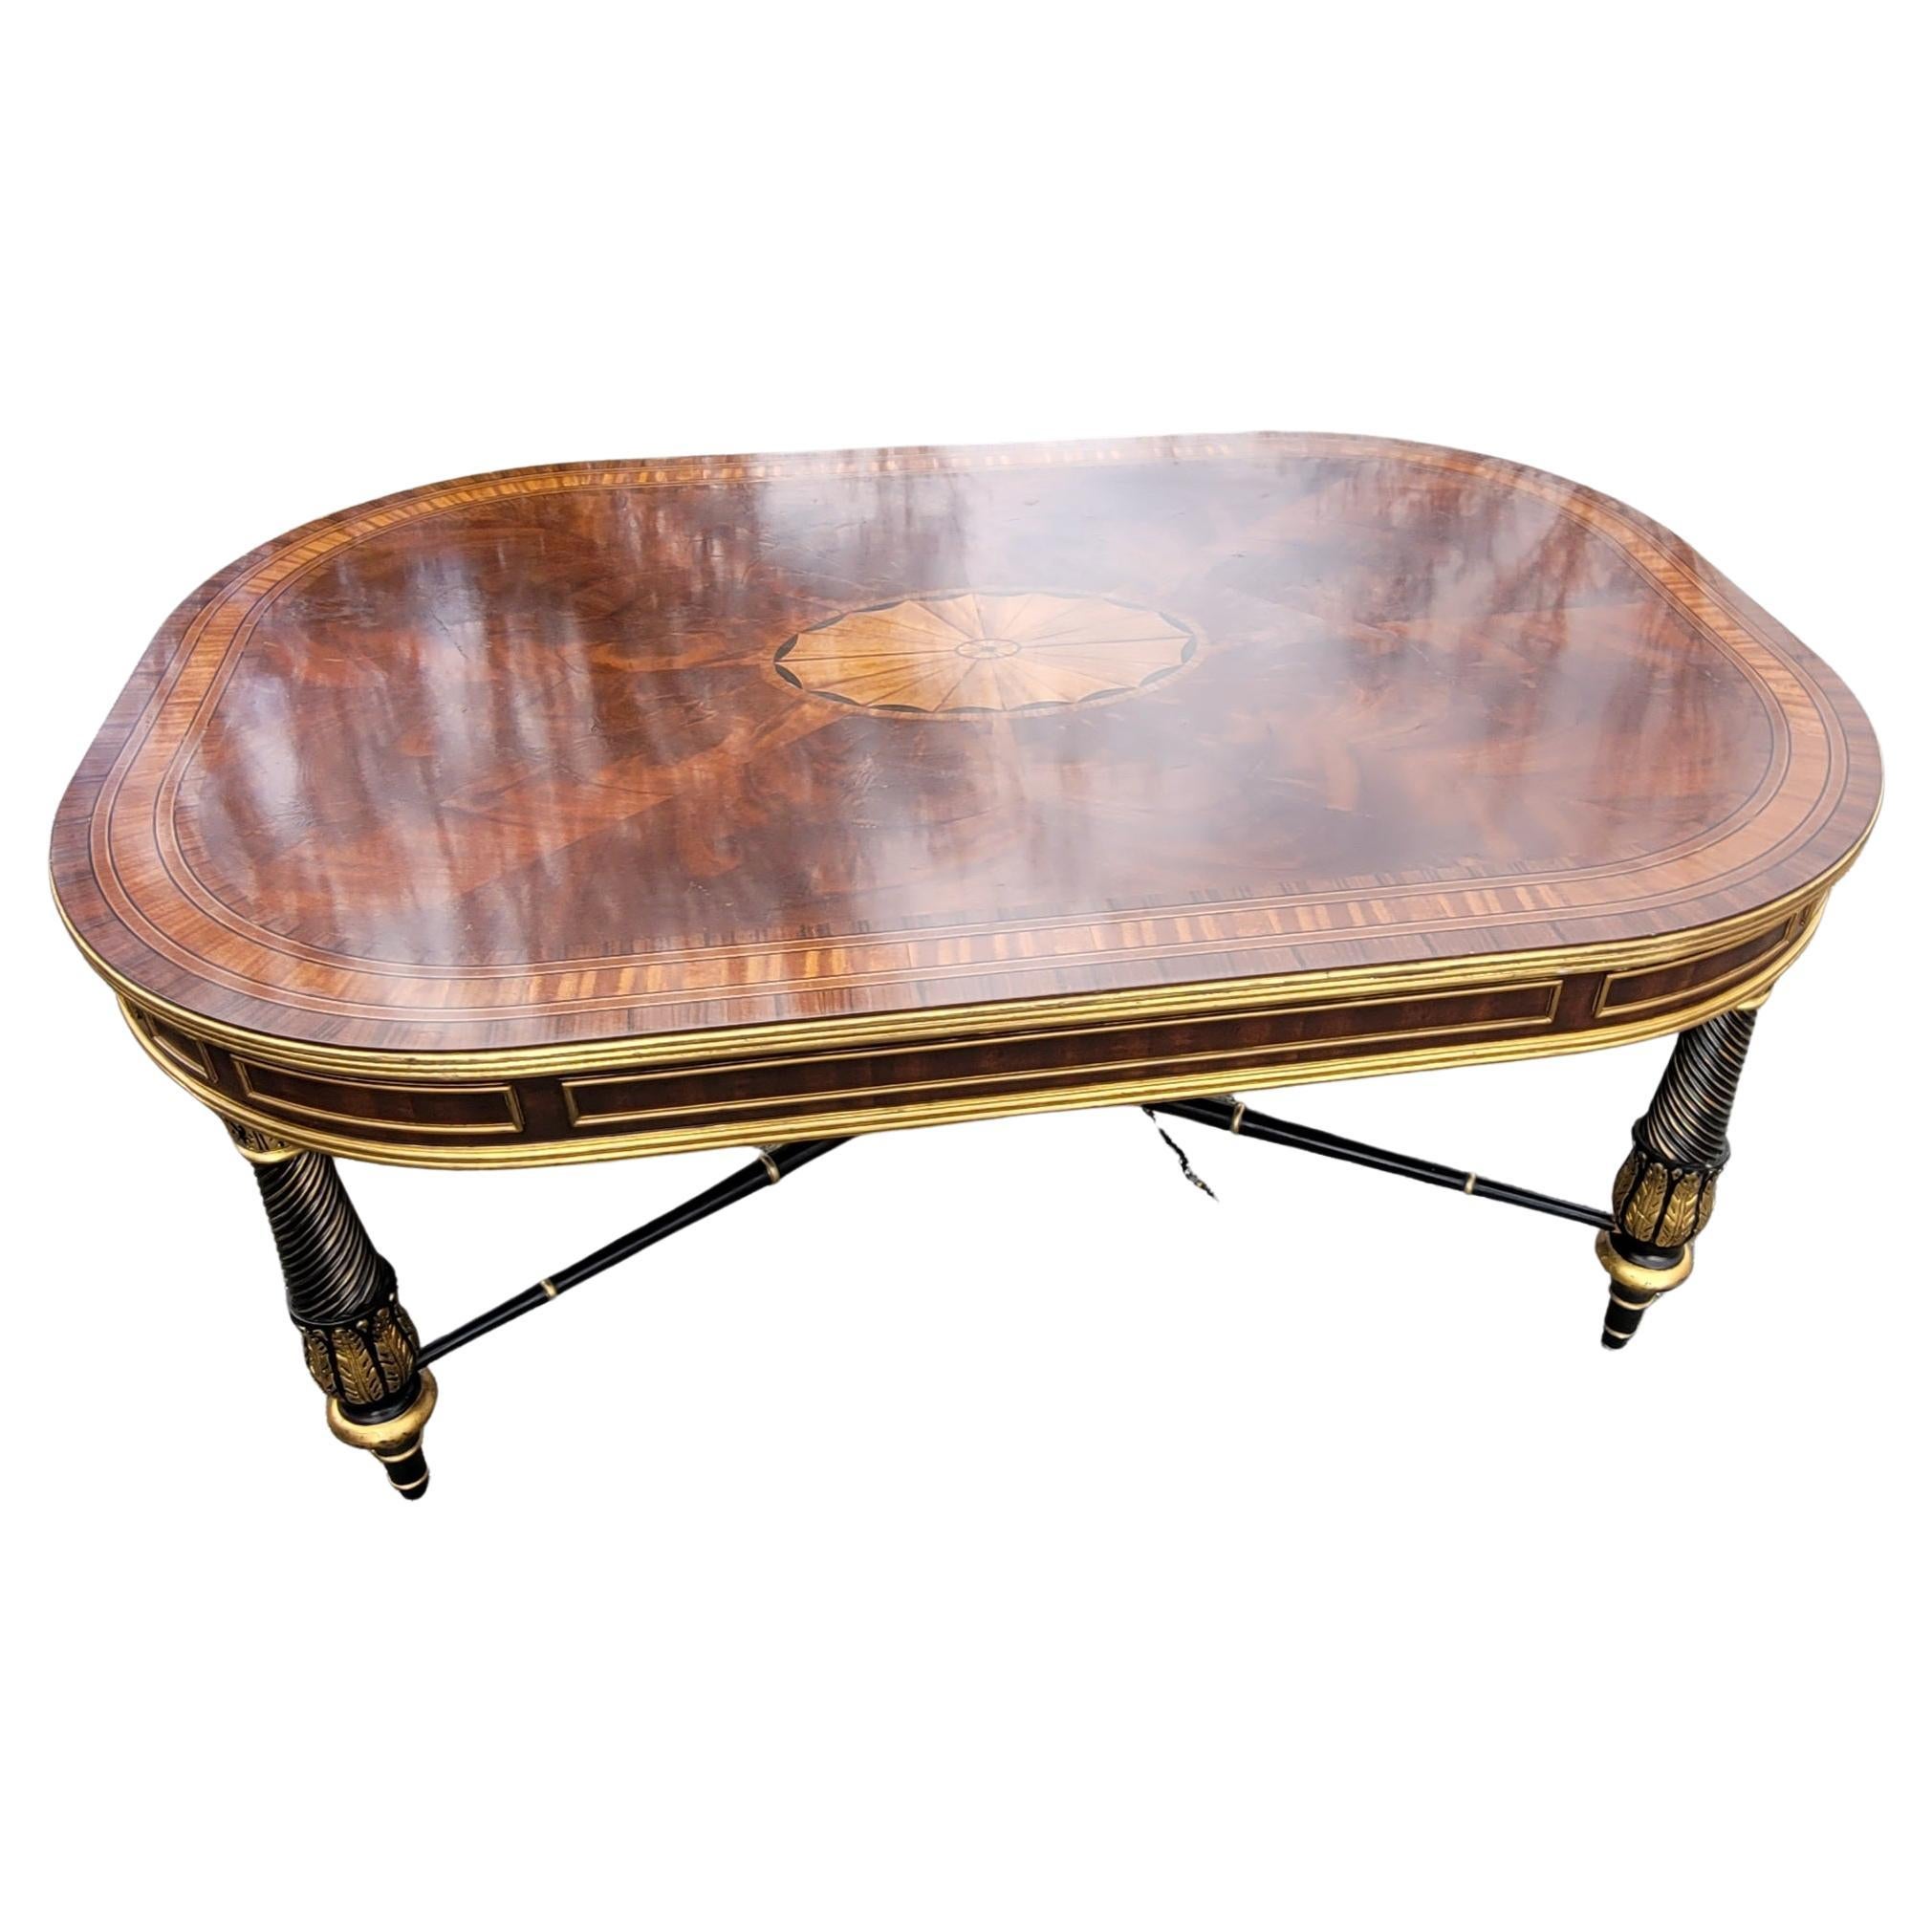 Absolutely gorgeous E.J Victor Regency Style Ebonized and Parcel Gilt Marquetry Inlaid Coffee Table. Features Flame mahogany top with a large center medallion inlaid with satinwood. Gilt decorated Mahogany apron. Very solid construction with large